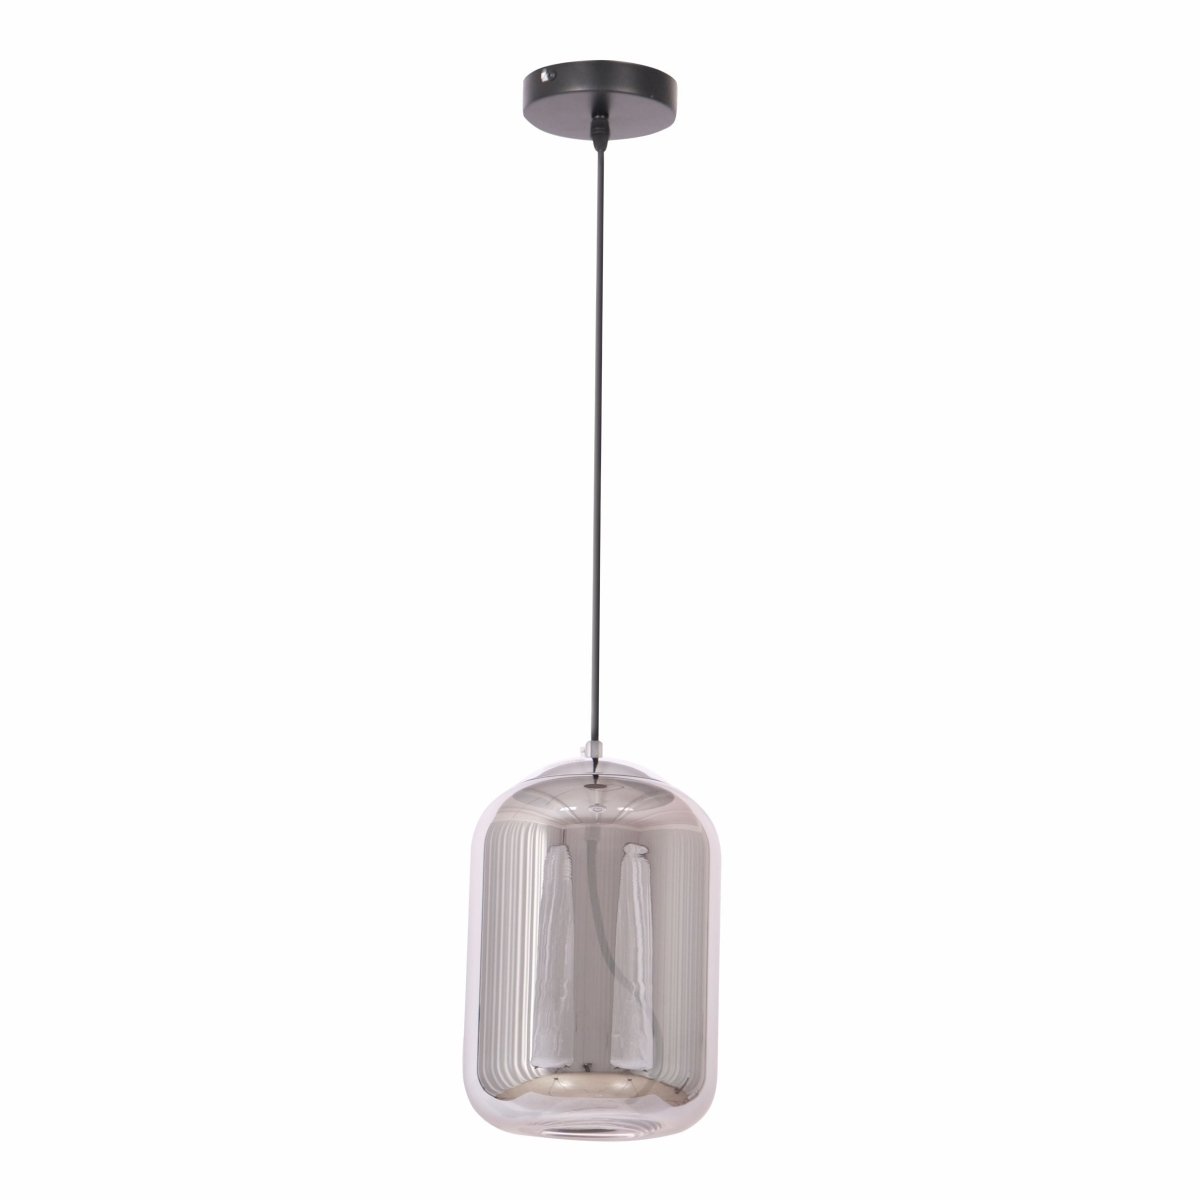 Main image of Smoky Glass Cylinder Pendant Light with G9 Fitting | TEKLED 159-17332